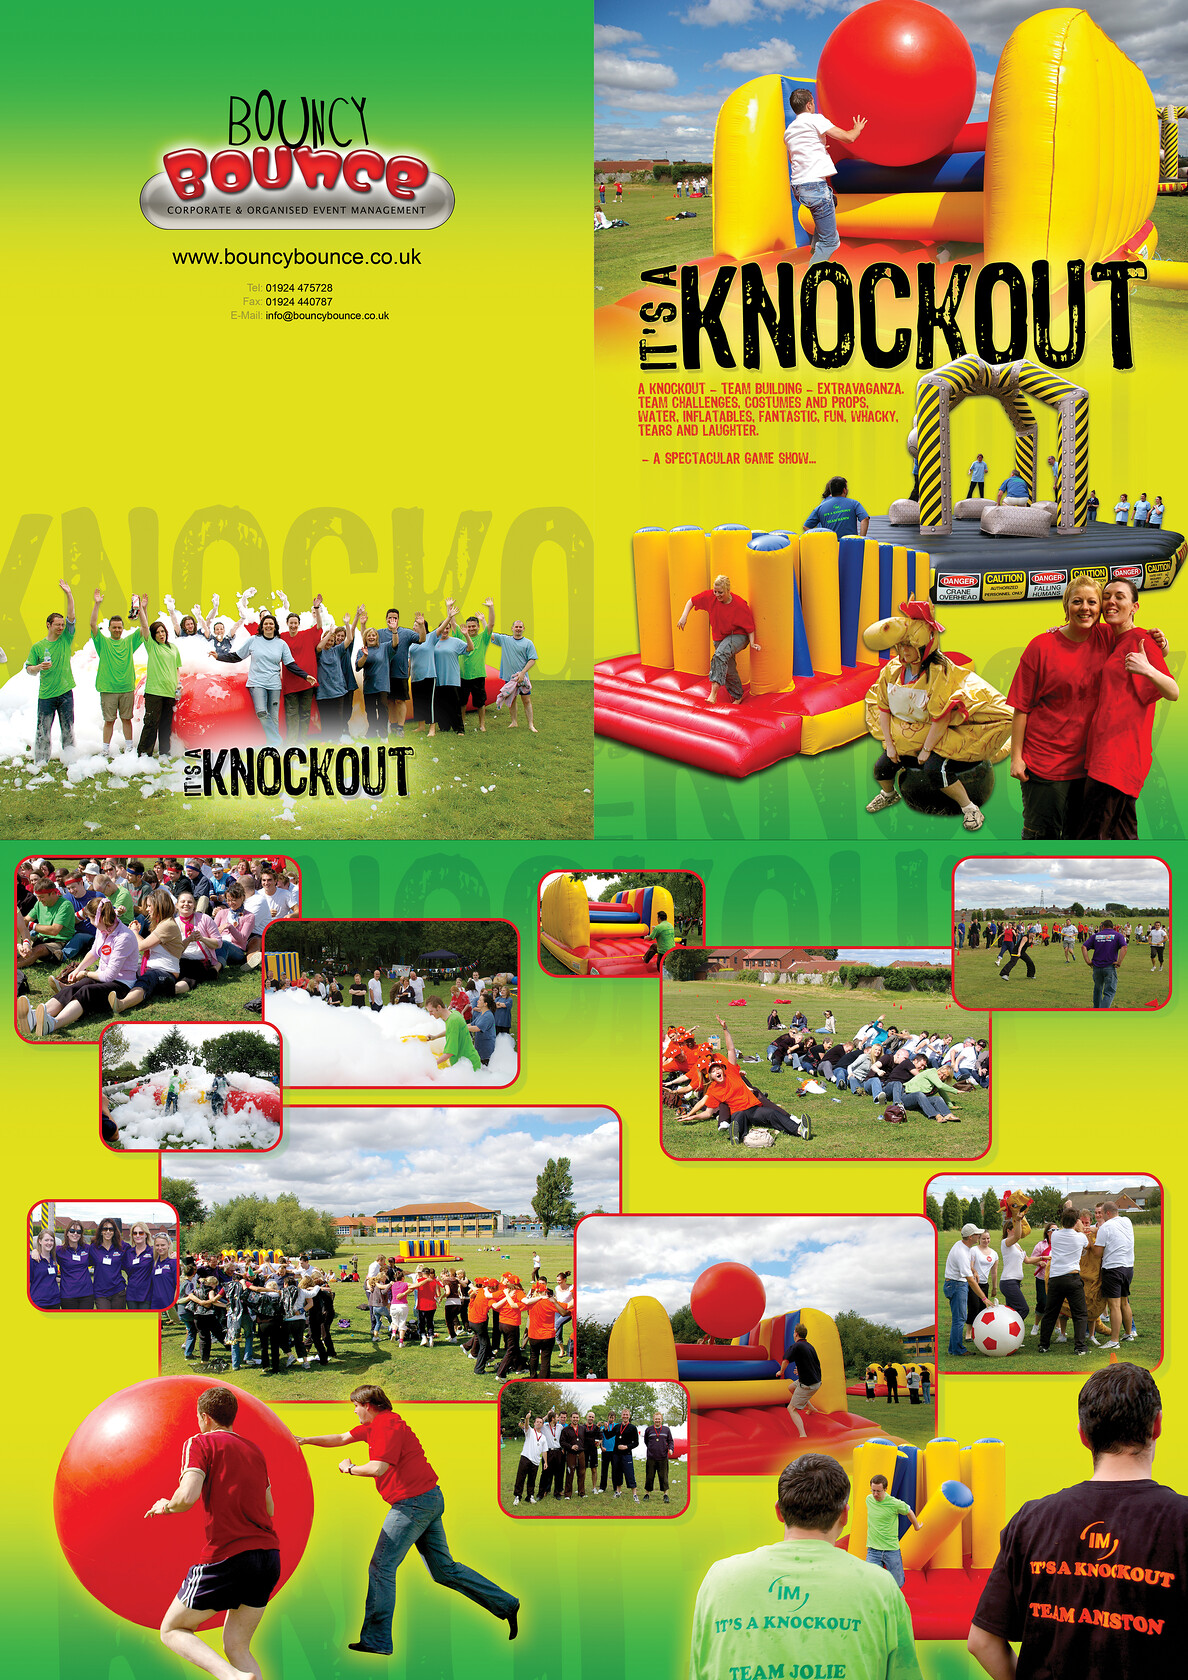 Bouncy Bounce Presentation Folder Design 
 Design of a presentation folder for Bouncy Bounce - Corporate and Organised Events 
 Keywords: Yellow, Green, Capacity, Graphics, Artwork, Designer, A4, Print, Printed, Card, Wallet, It's A Knockout, Document